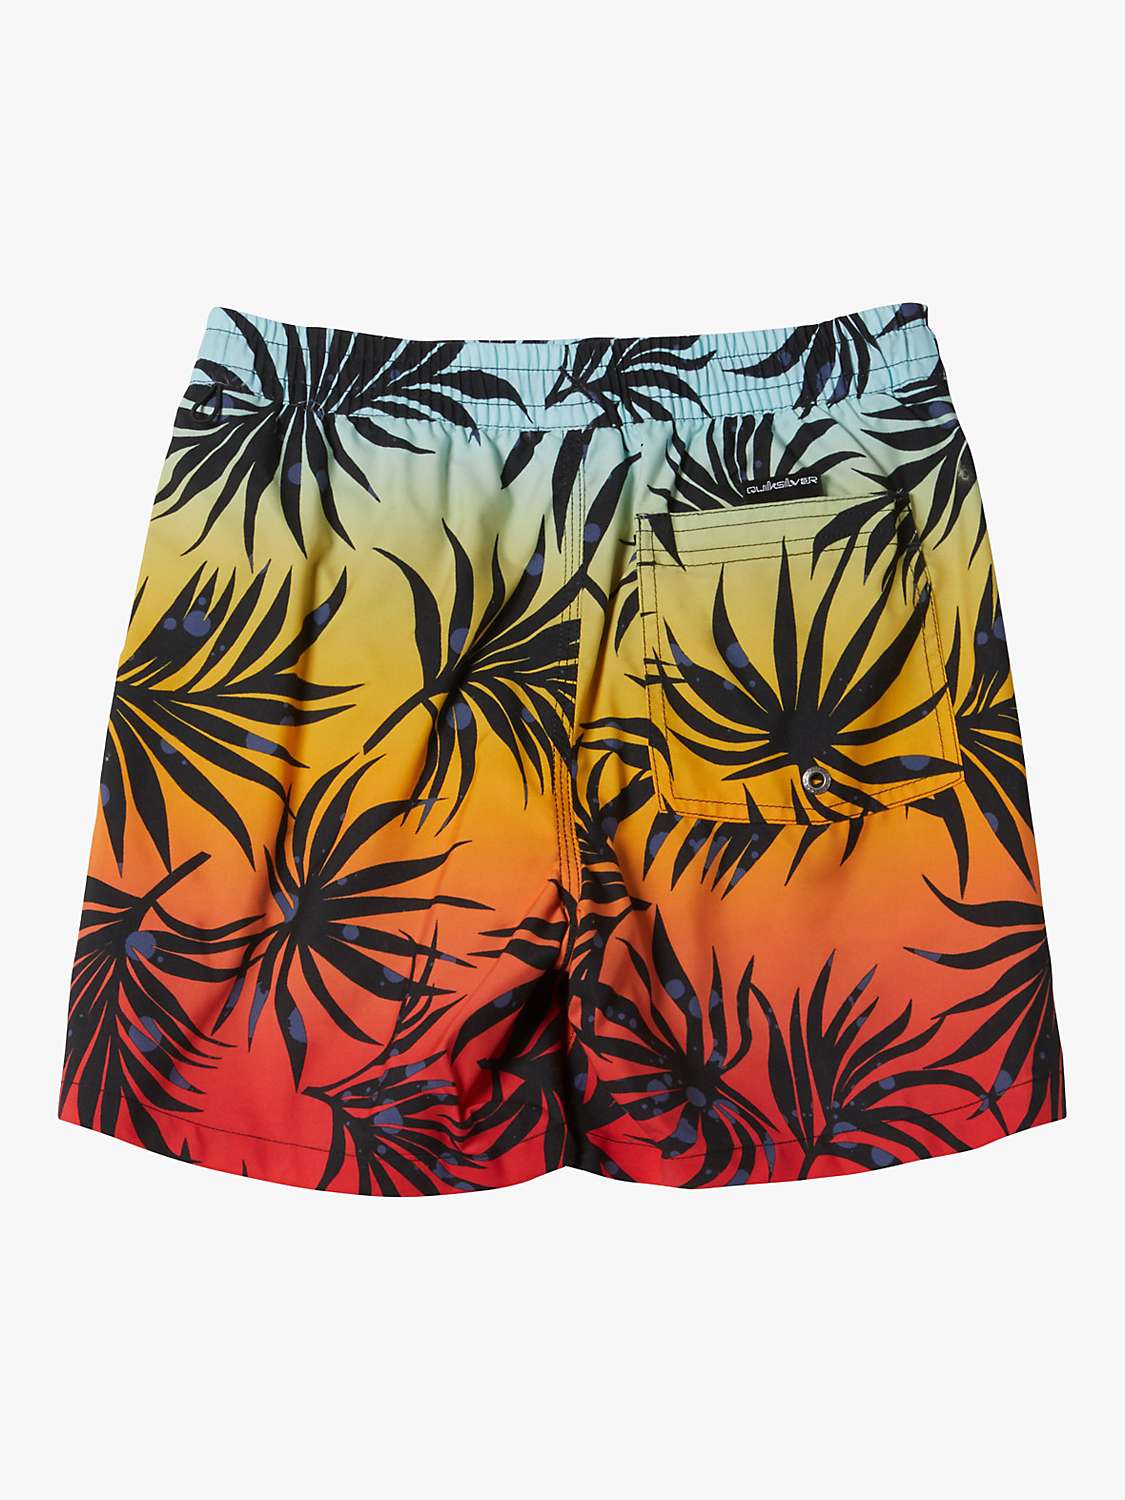 Buy Quiksilver Kids' Everyday Collection Mix Volley Swim Shorts Online at johnlewis.com